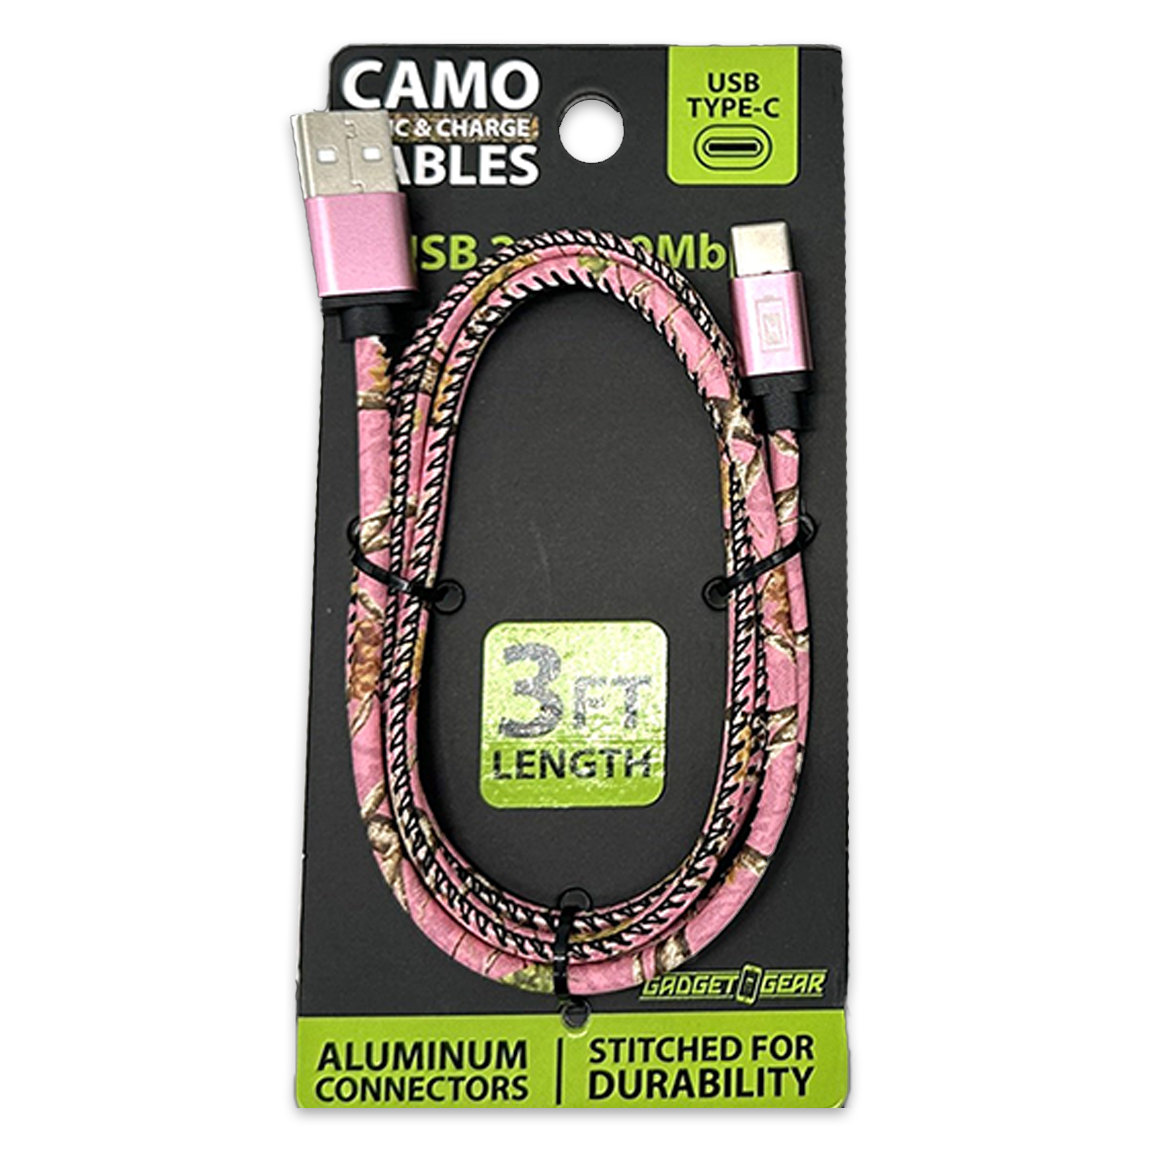 ITEM NUMBER 023702L 3FT CAMO CABLE TYPE C - STORE SURPLUS NO DISPLAY 6 PIECES PER PACK